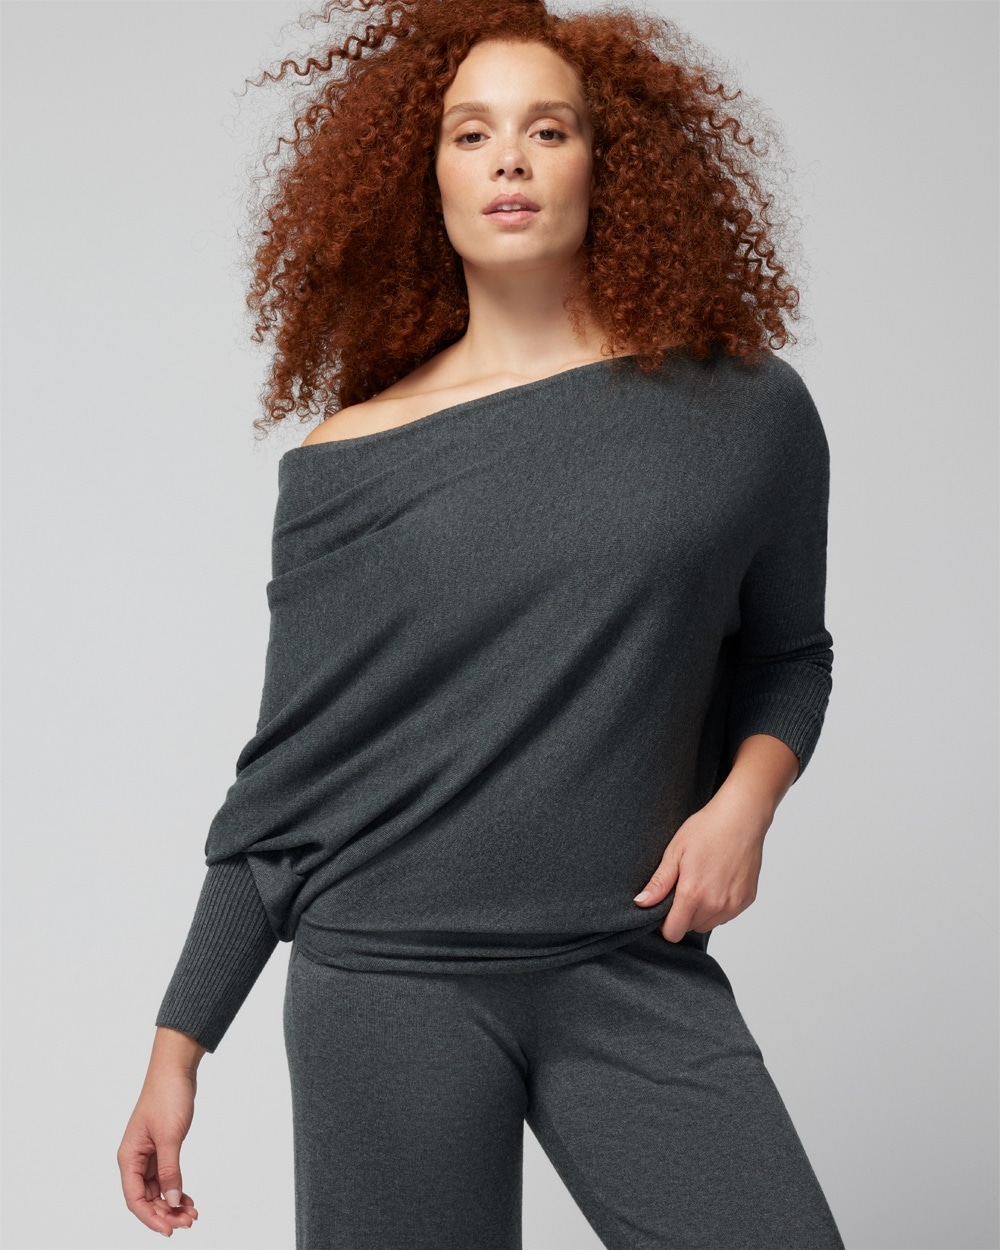 Luxe Soft Off-The-Shoulder Sweater video preview image, click to start video